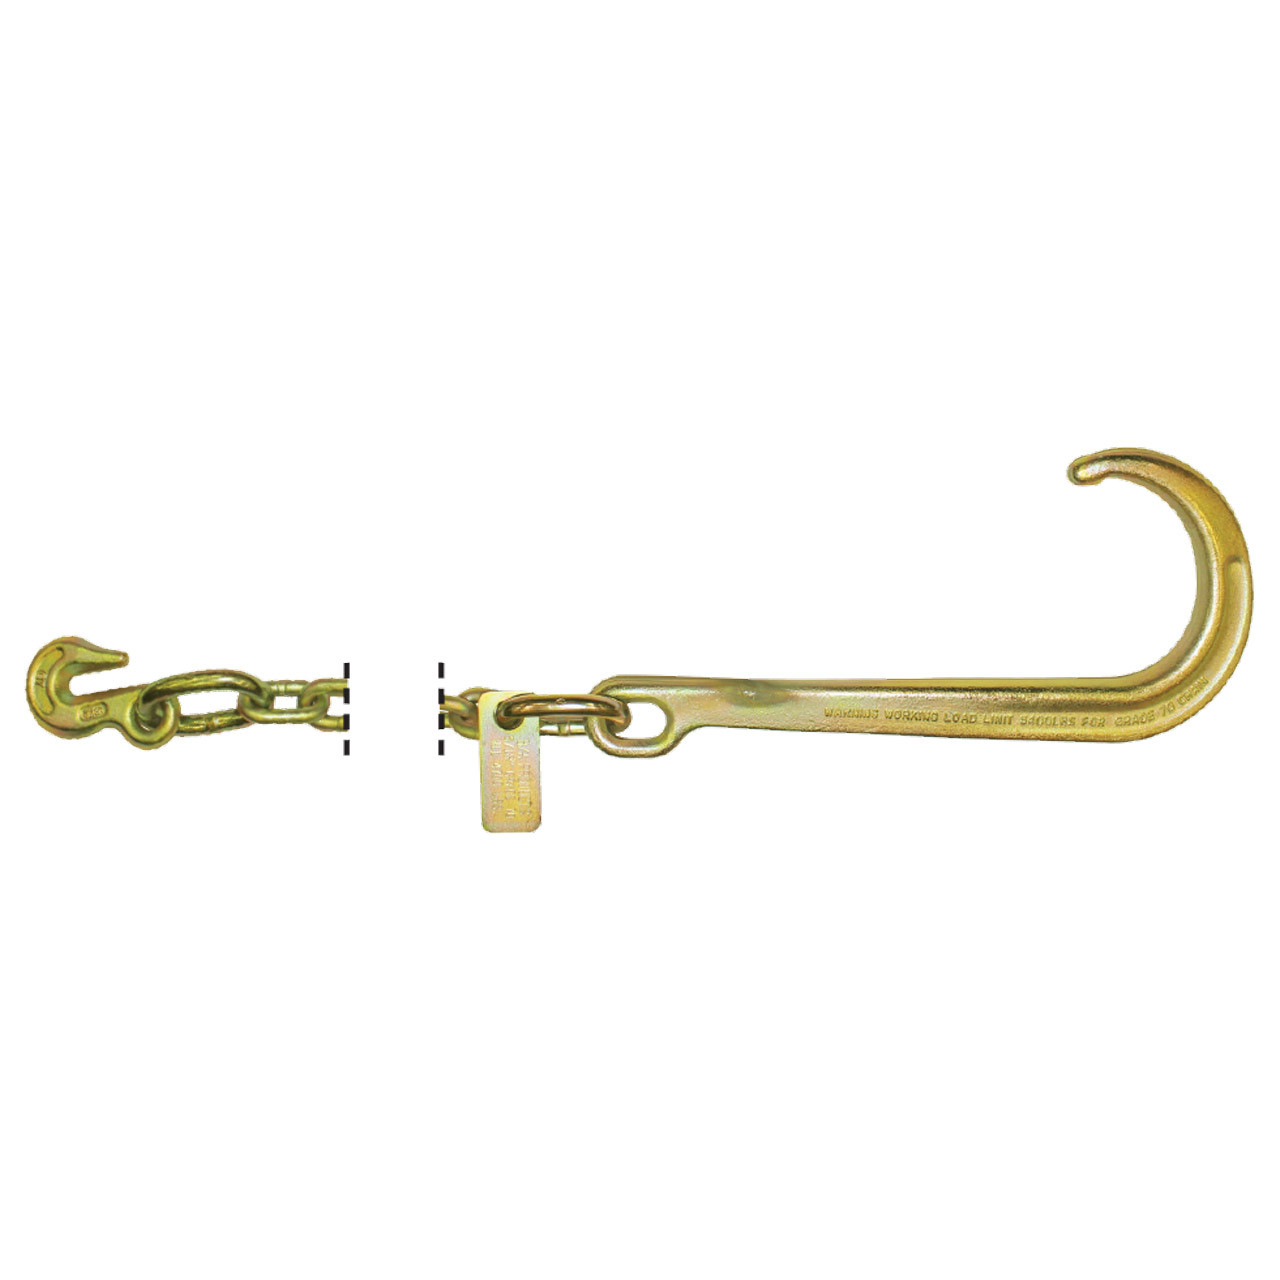 Grab & 15-Inch Classic Style J Hook Chain 5/16-Inch by 8-Foot